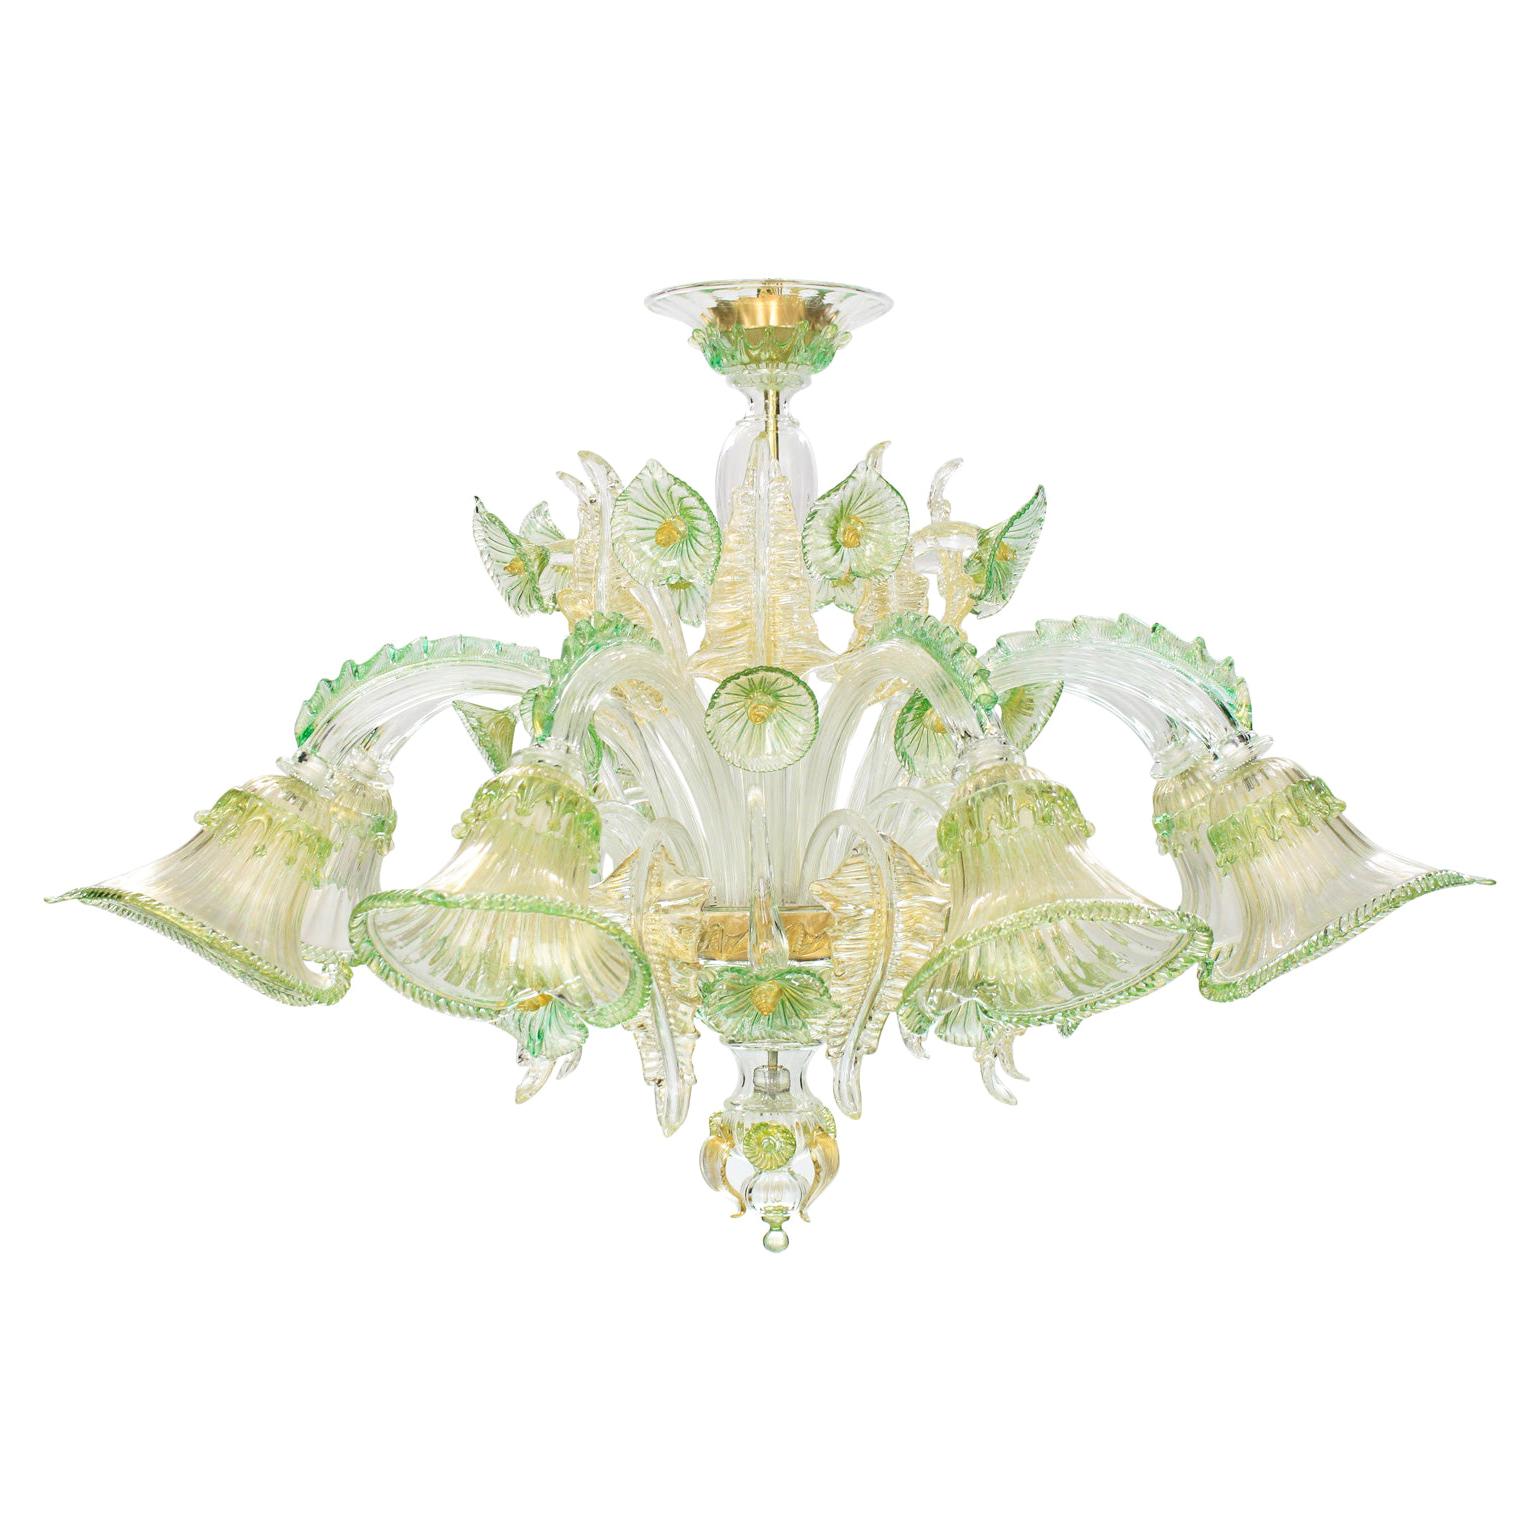 Artistic Ceiling Lamp 8 Arms, Crystal, Green, Gold Murano Glass by Multiforme For Sale